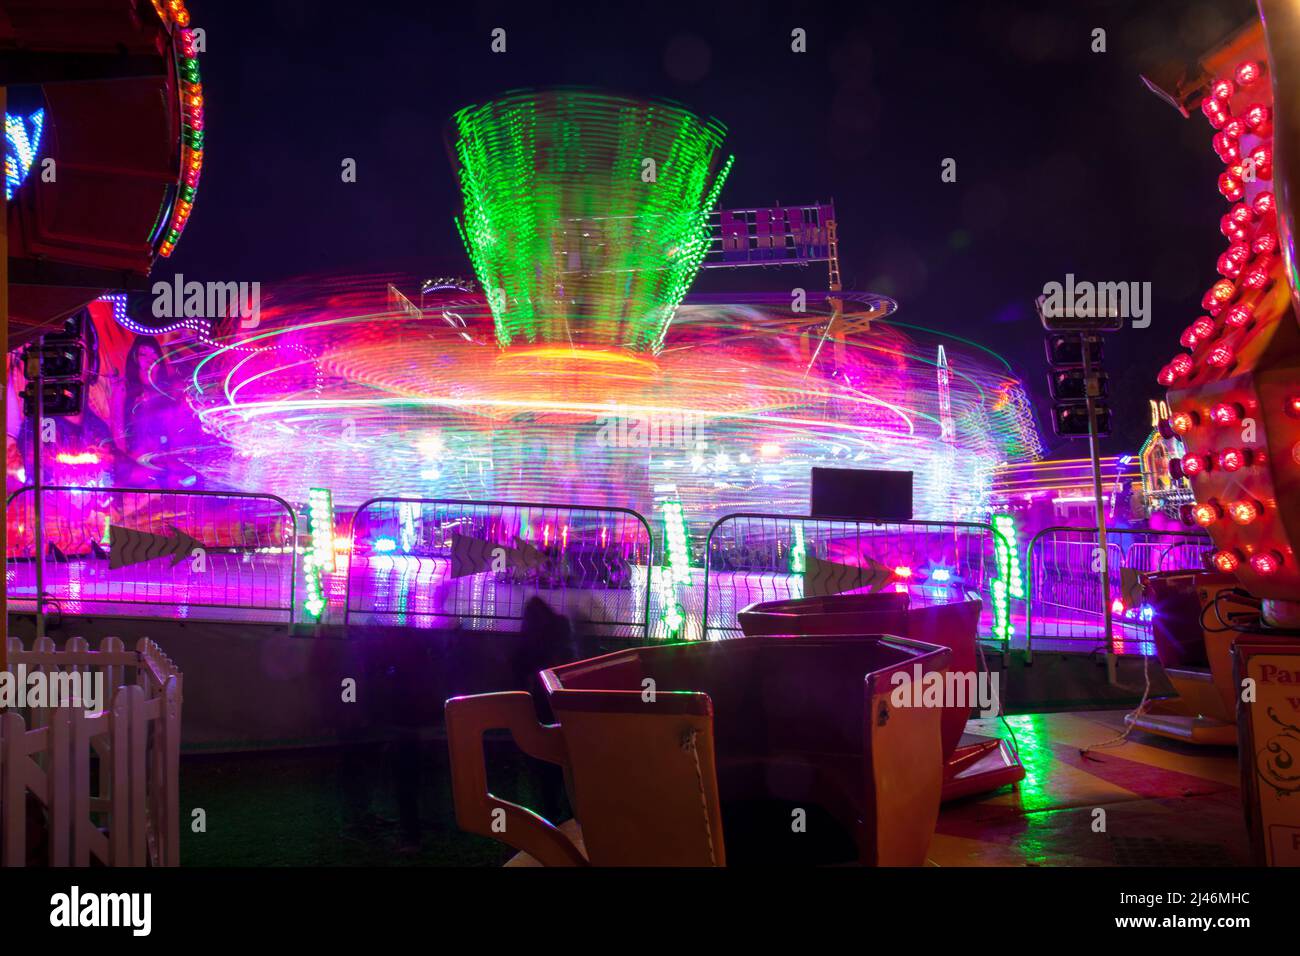 Long exposure images of the fairground rides at Oxford's St Giles travelling funfair held annually in September. Stock Photo